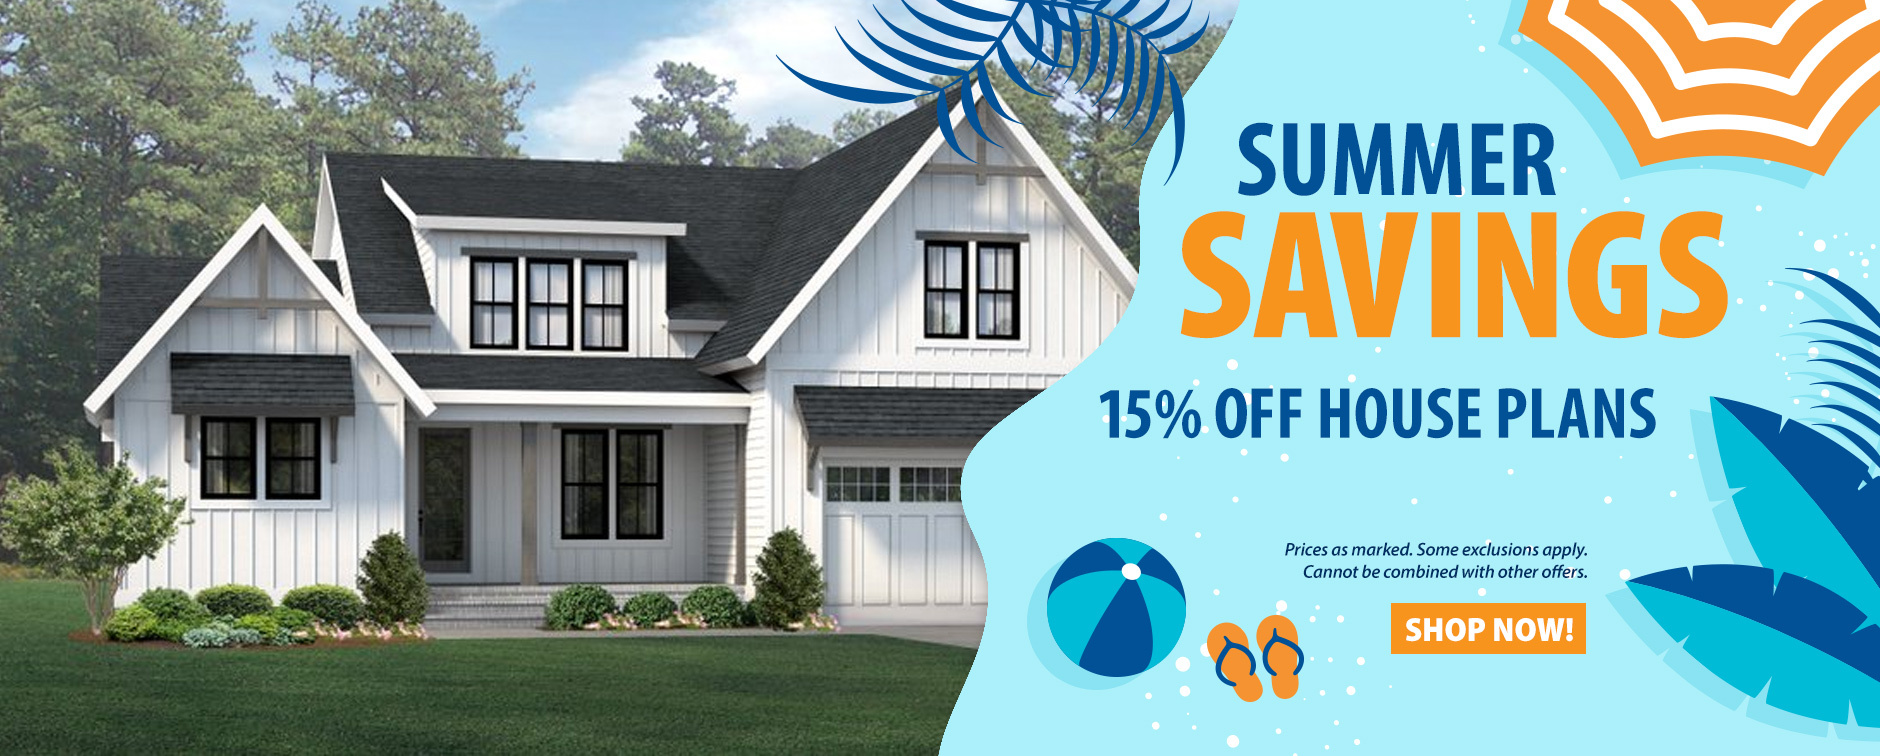 Take 15% Off House Plans